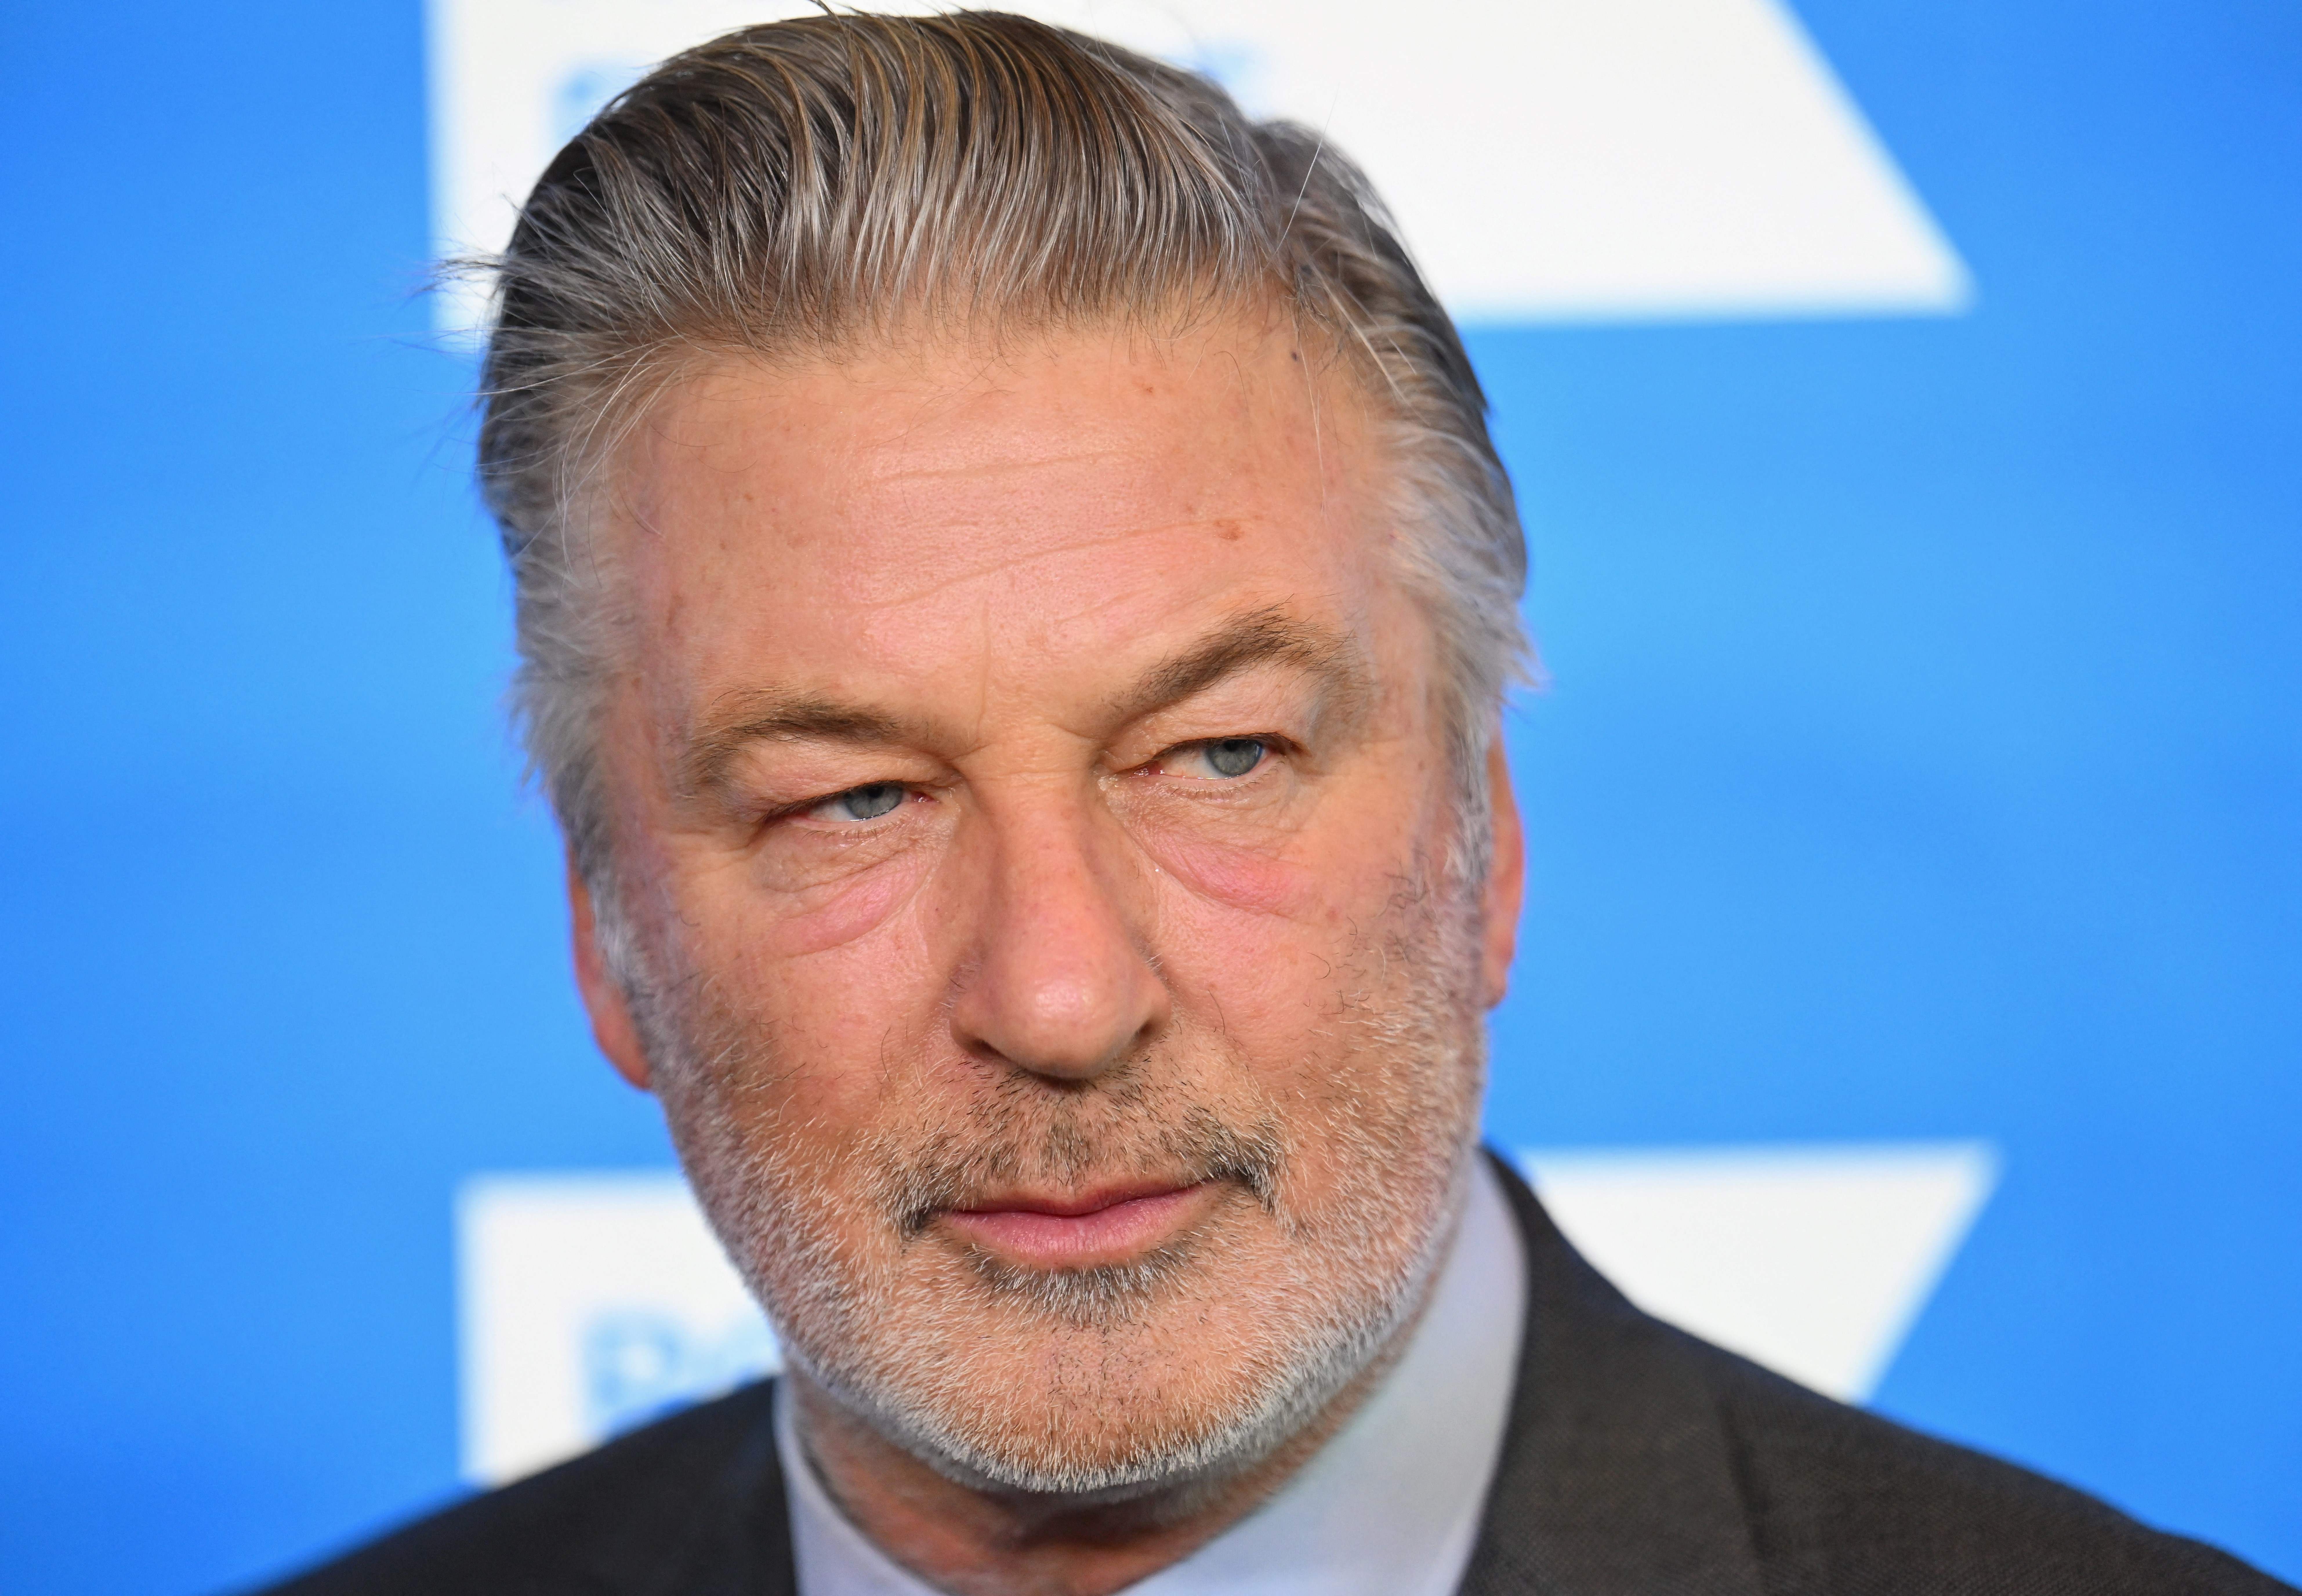 Alec Baldwin Charged in ‘Rust' Shooting, Prosecutors Say He Was ‘Distracted' During Training